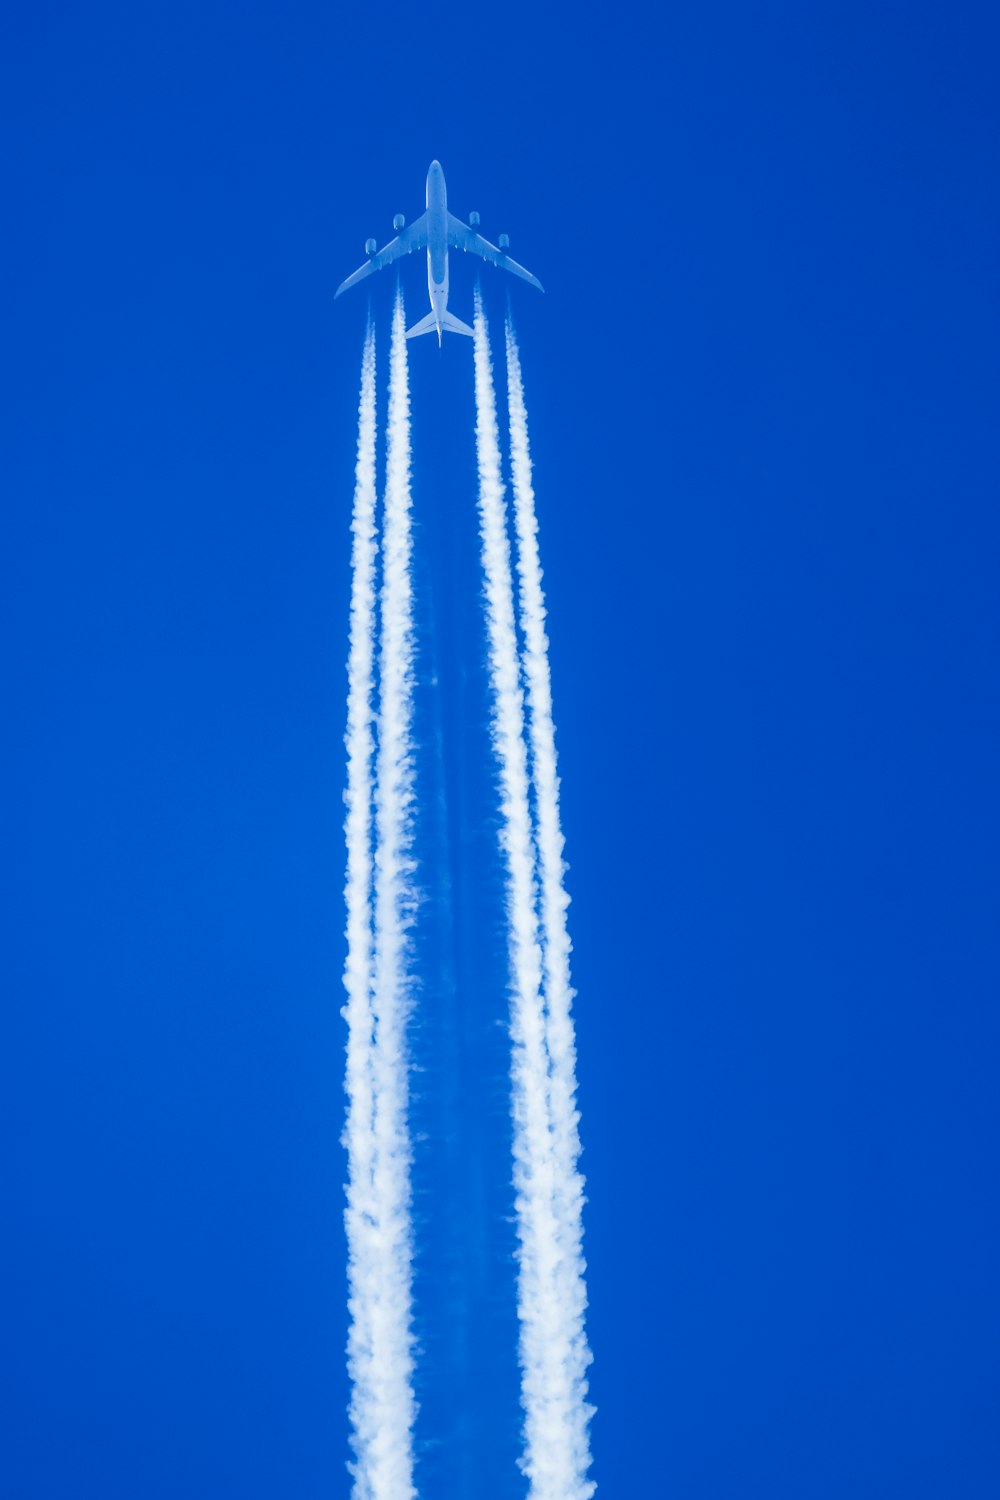 a jet flying through a blue sky leaving a trail of smoke behind it